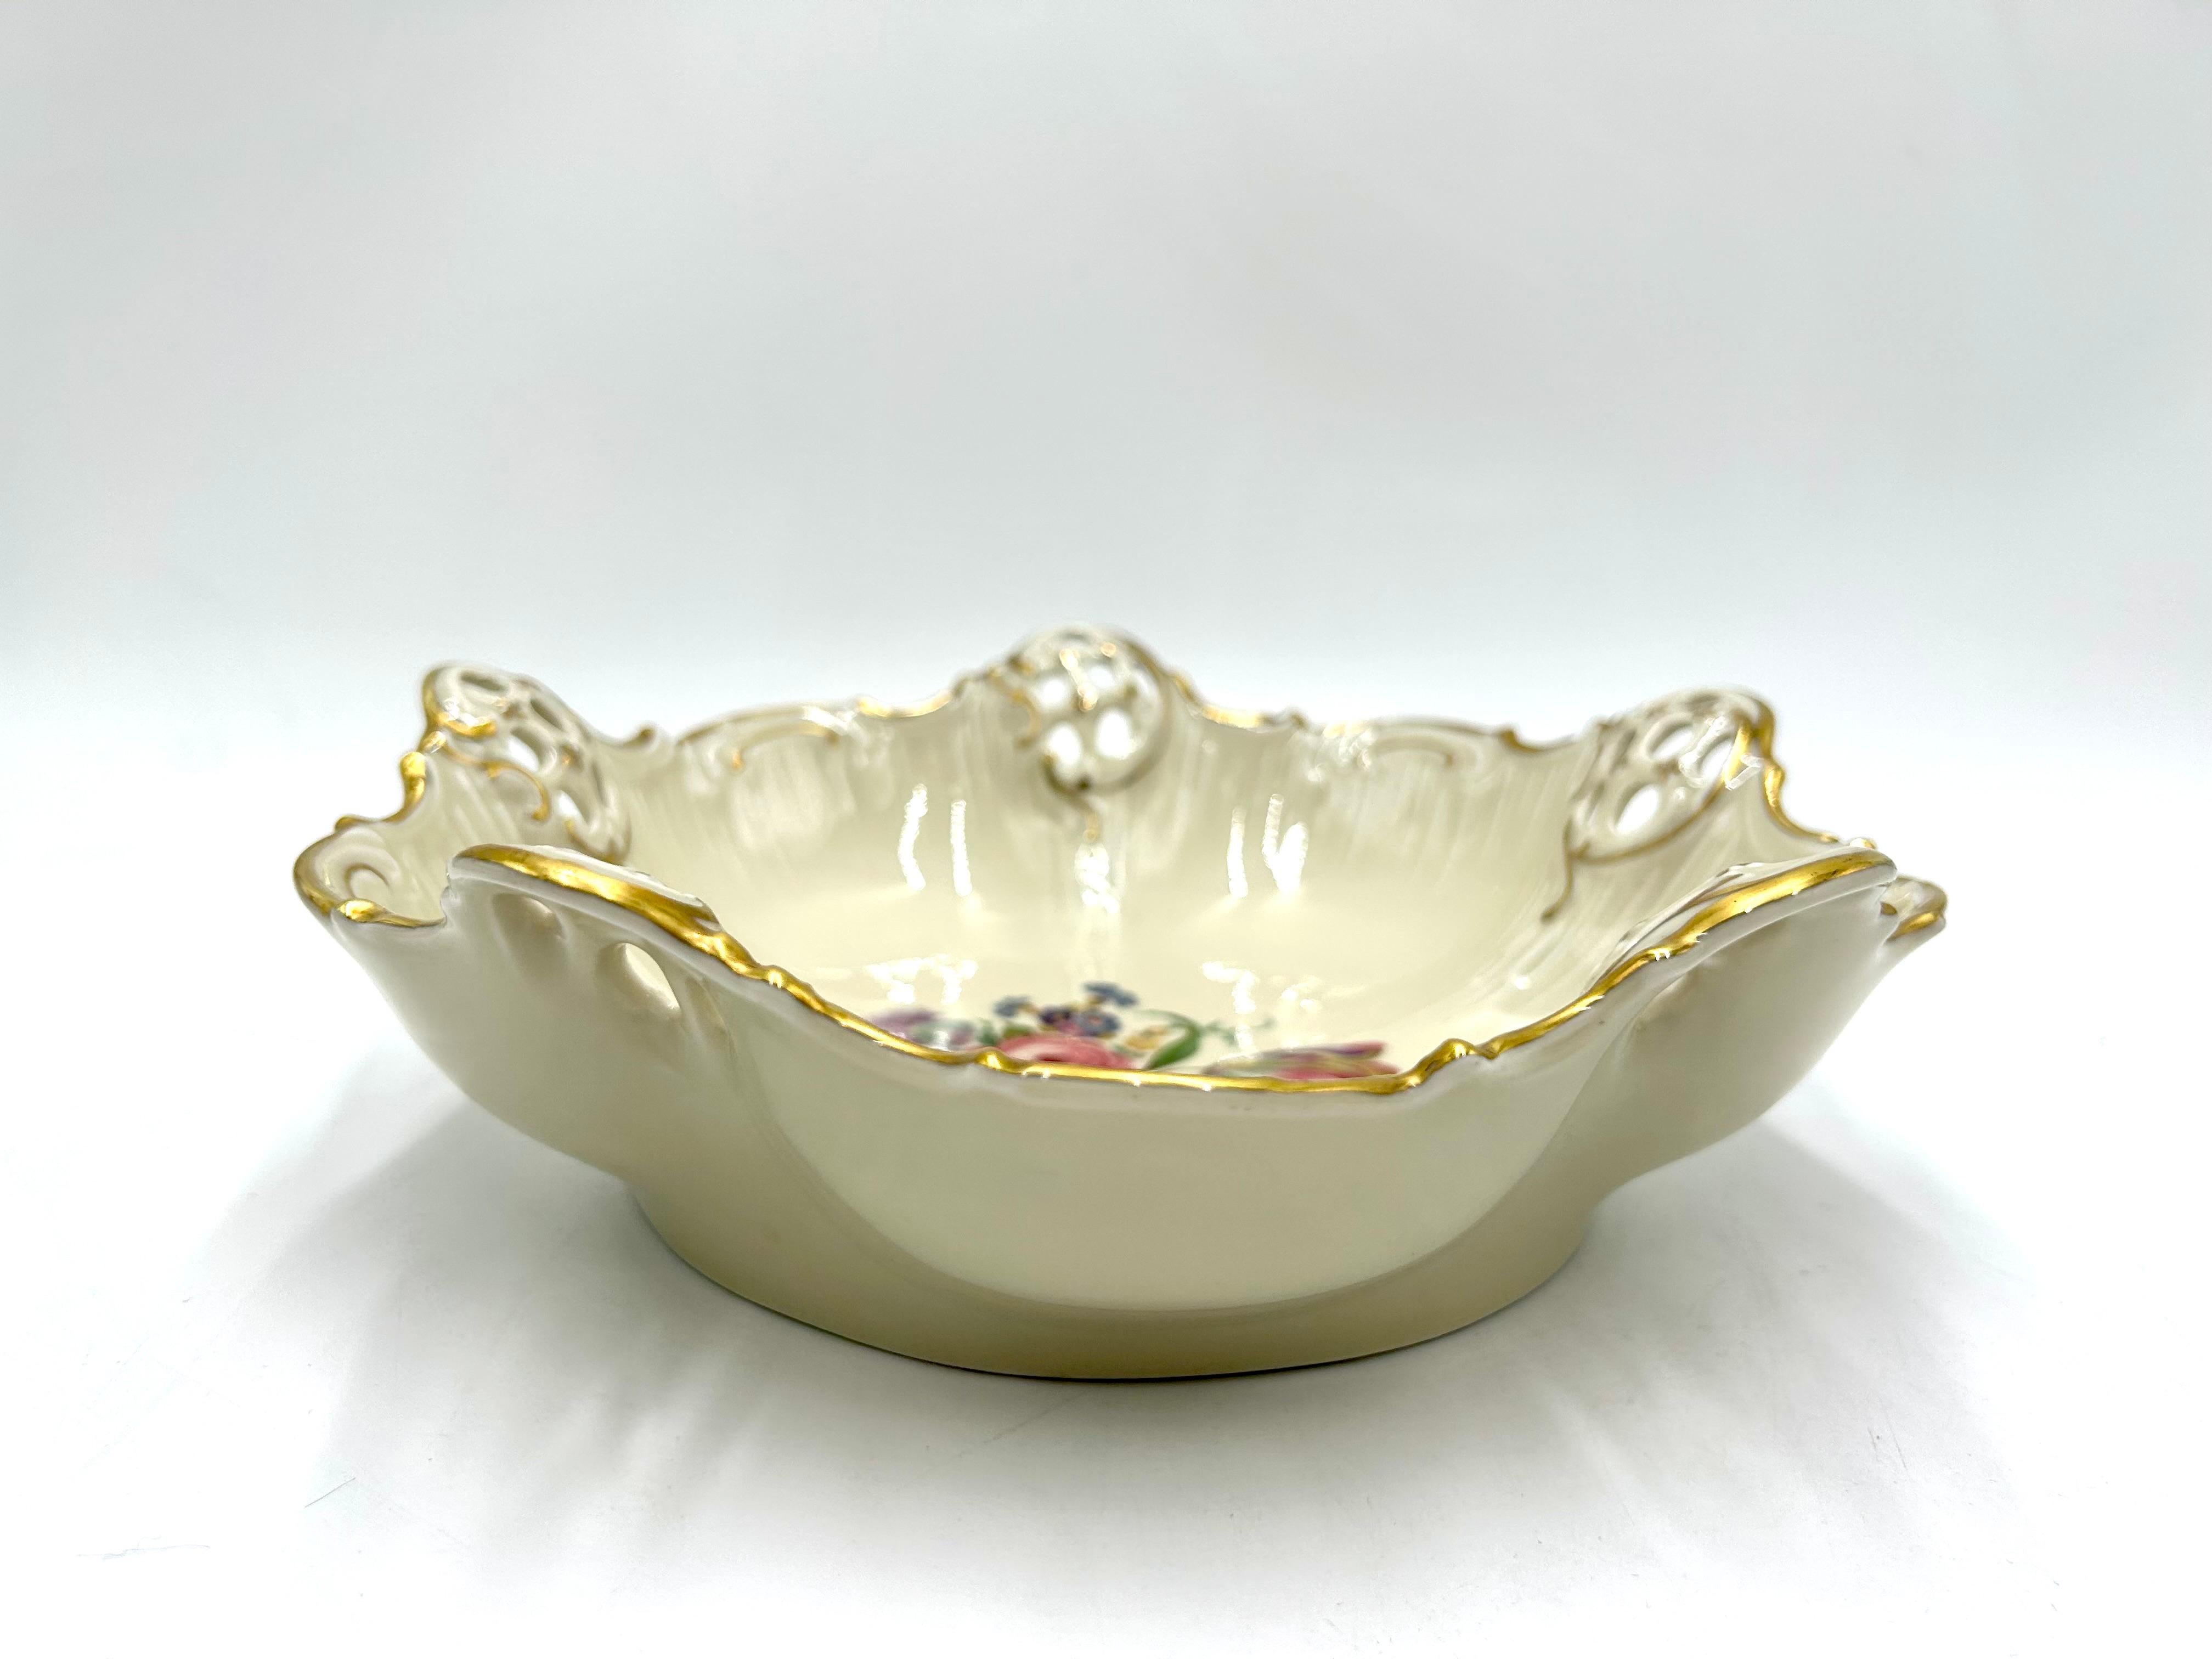 Porcelain openwork bowl made of ecru porcelain, decorated with gilding and a bouquet of flowers motif. A product of the valued German manufacturer Rosenthal from the Moliere series. Signed with the mark used in the years 1938-1952. Very good